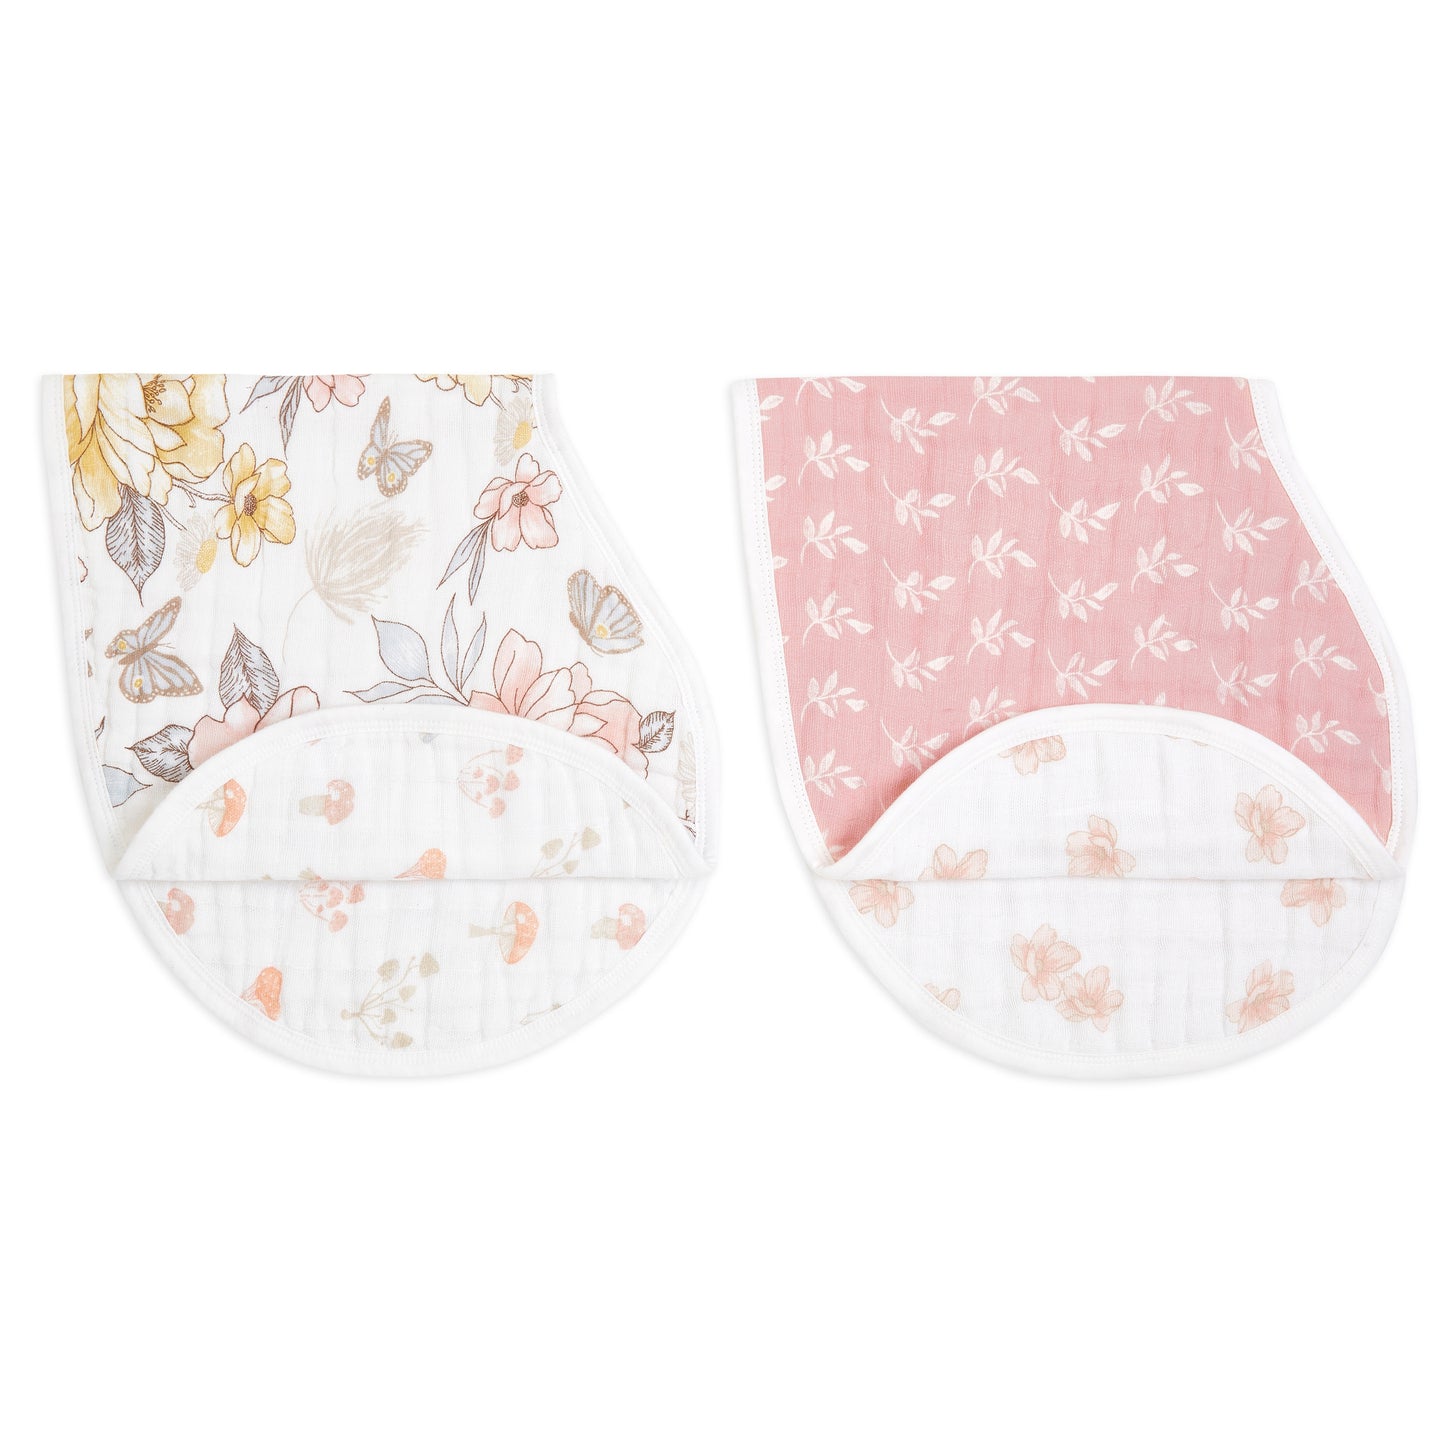 two earthly burpy bibs on a white background